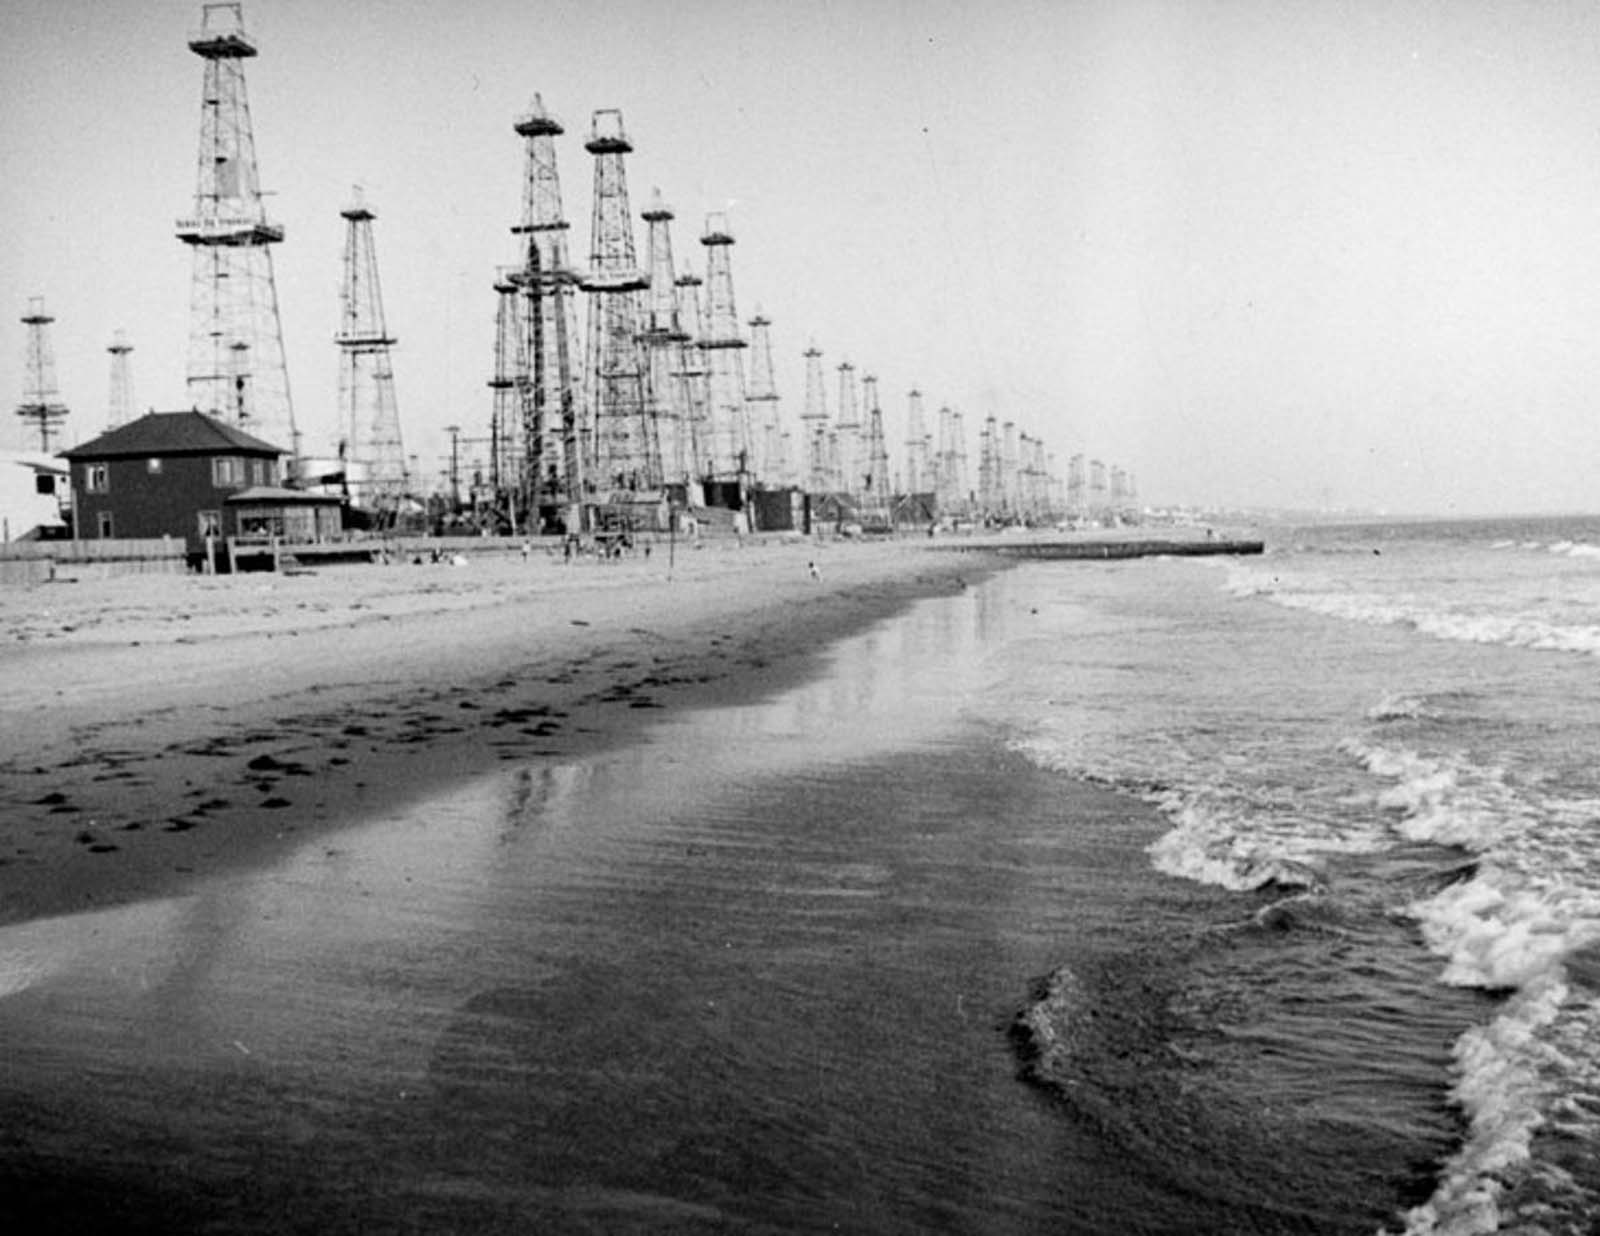 The coast along the Venice oilfield, in what is now Marina del Rey, 1937